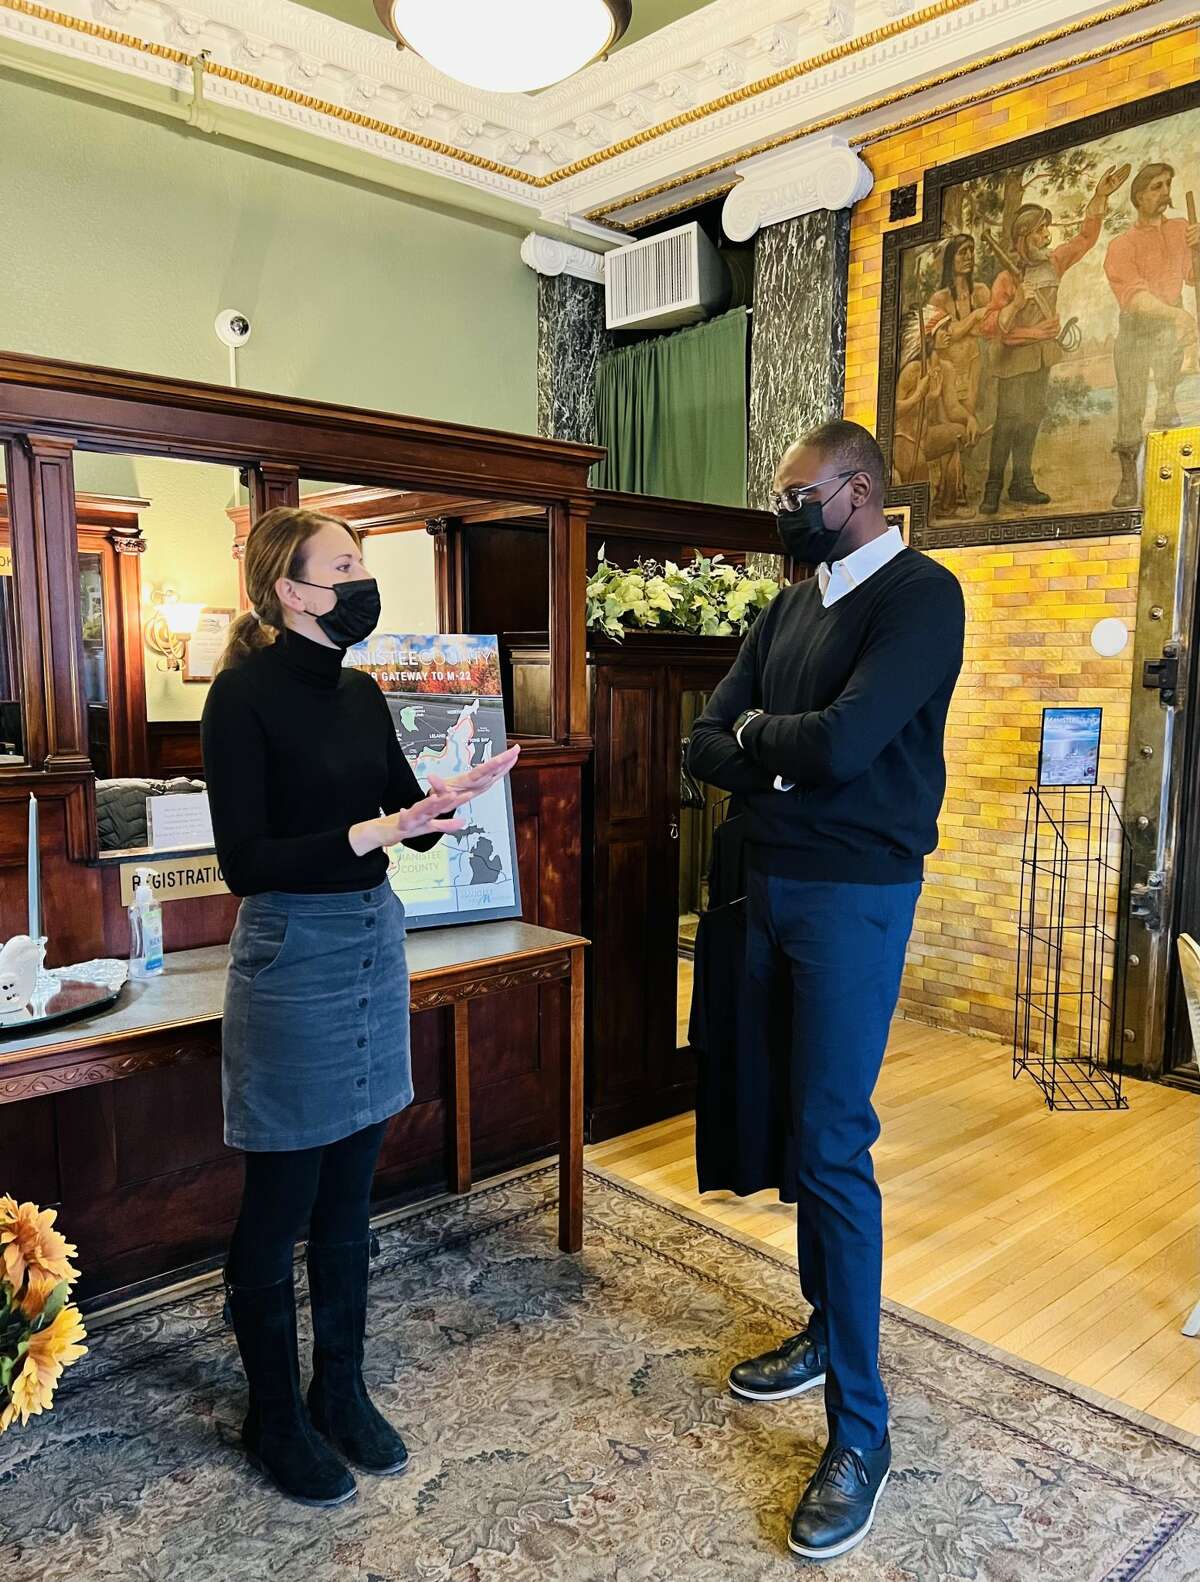 Lindsey Swidorski speaks with Lt. Governor Garlin Gilchrist about some of the challenges she faced over the past year. The lieutenant governor visited Manistee Monday to talk with the Economic Development Council to talk about projects, some of the challenges and past successes, and the types of development projects that Manistee may have in the future.